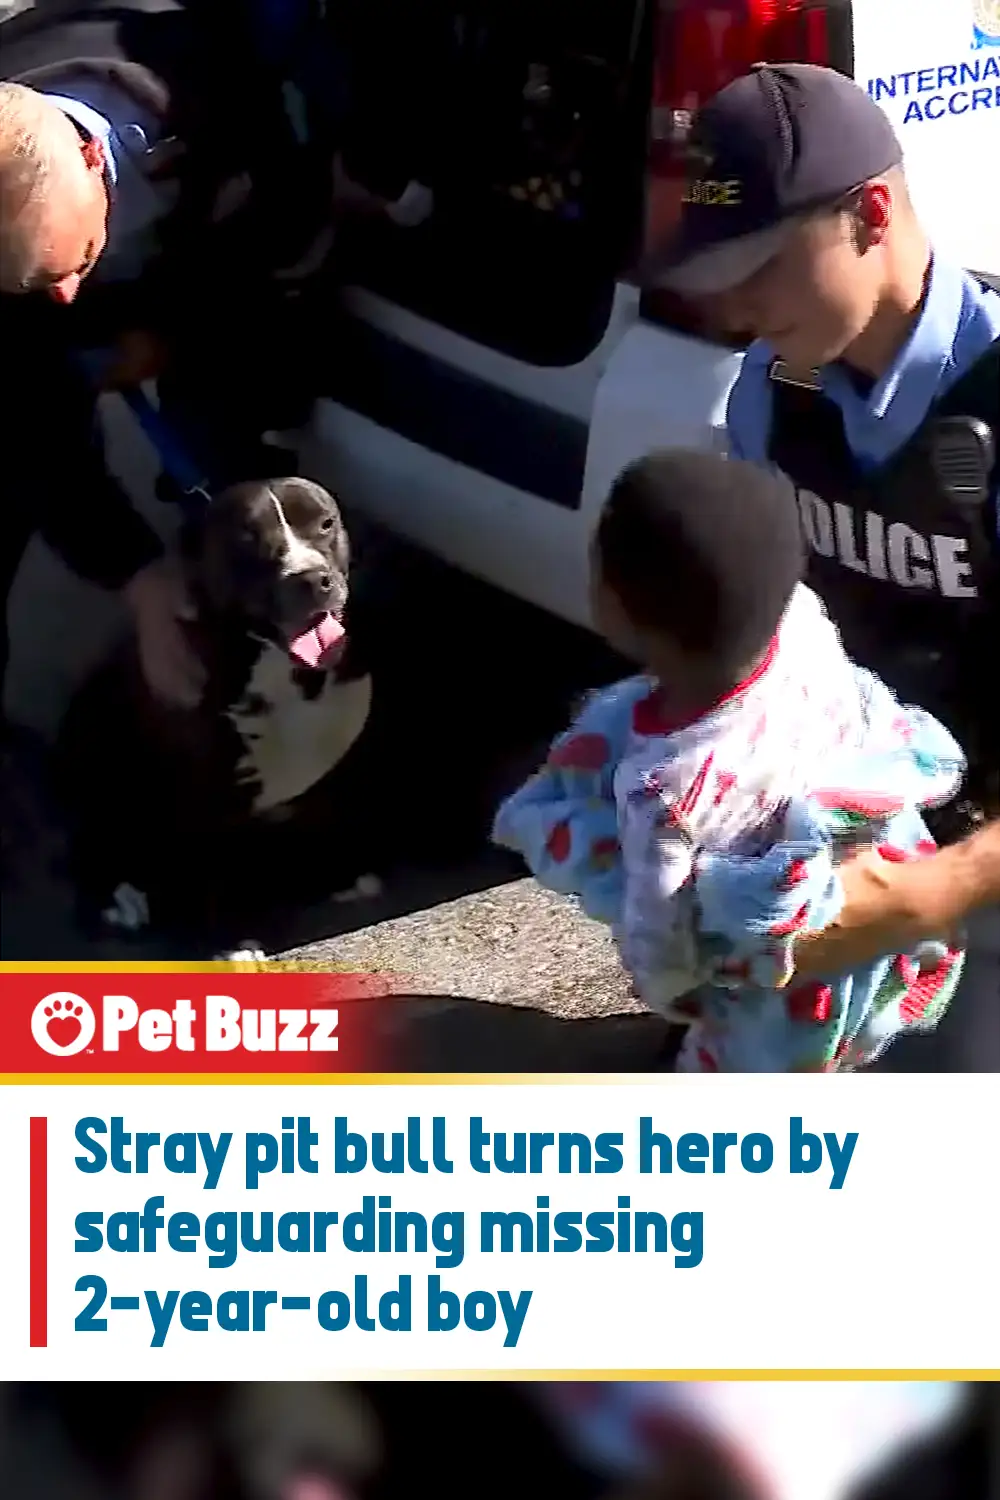 Stray pit bull turns hero by safeguarding missing 2-year-old boy